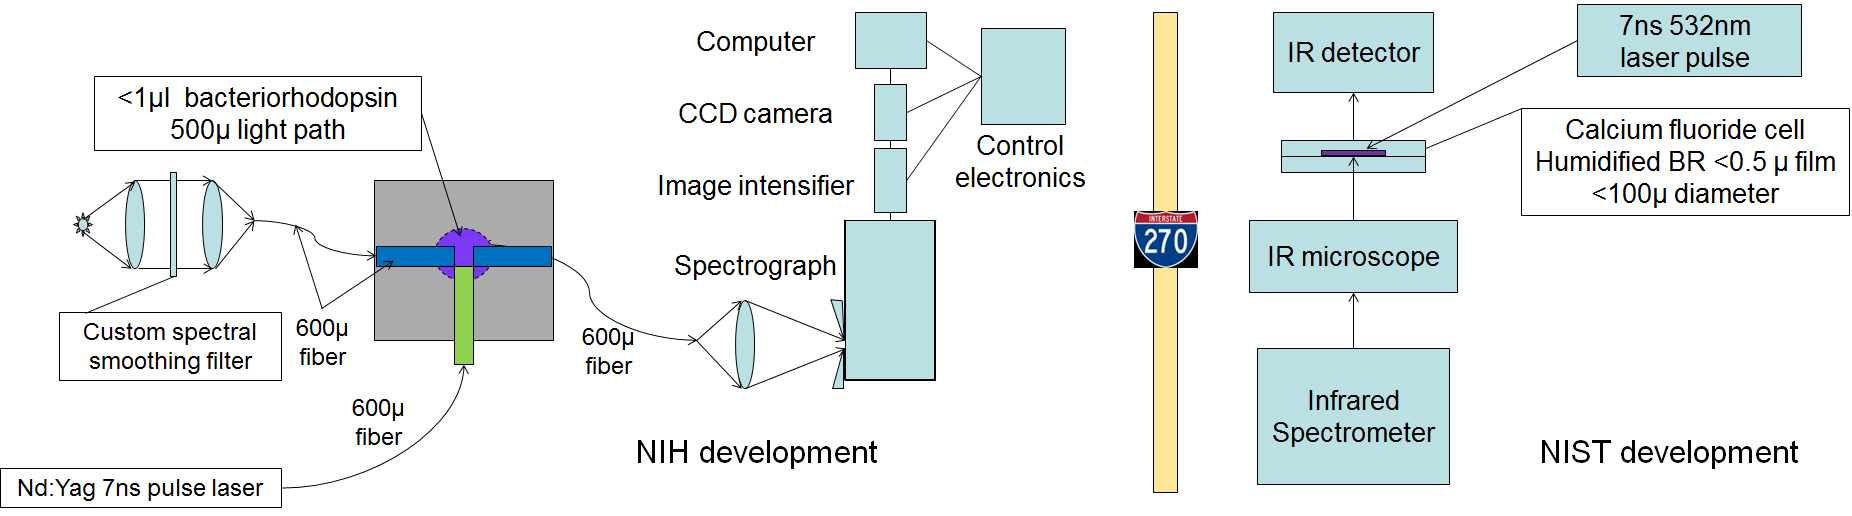 System diagram of the NIH-NIST collaboration combining visible and IR spectrometers